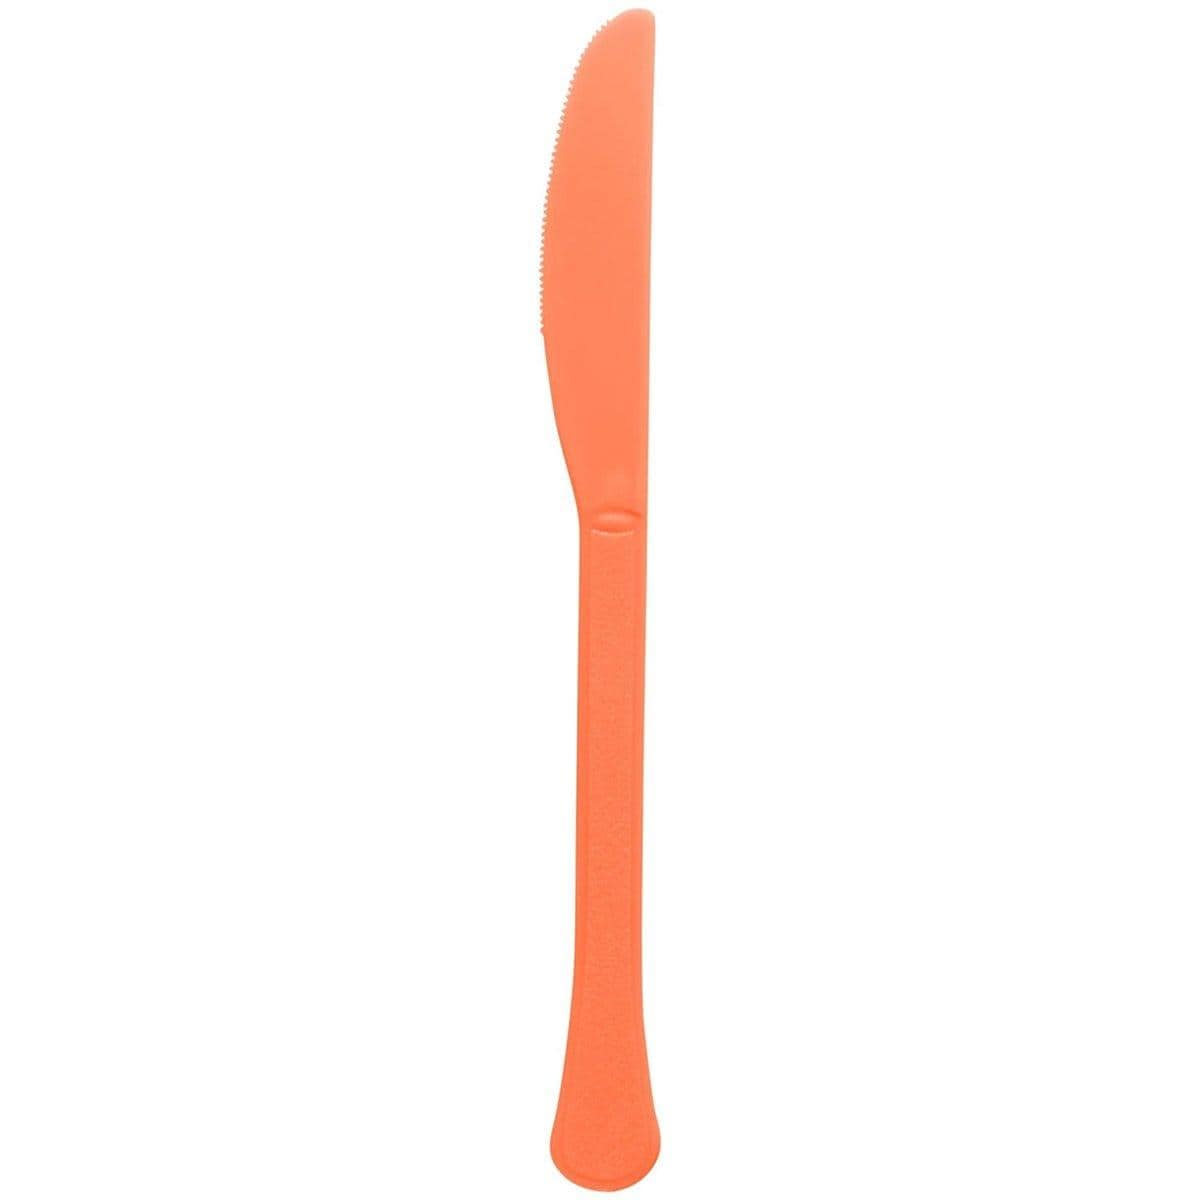 Buy Plasticware Orange Peel Plastic Knives, 20 Count sold at Party Expert